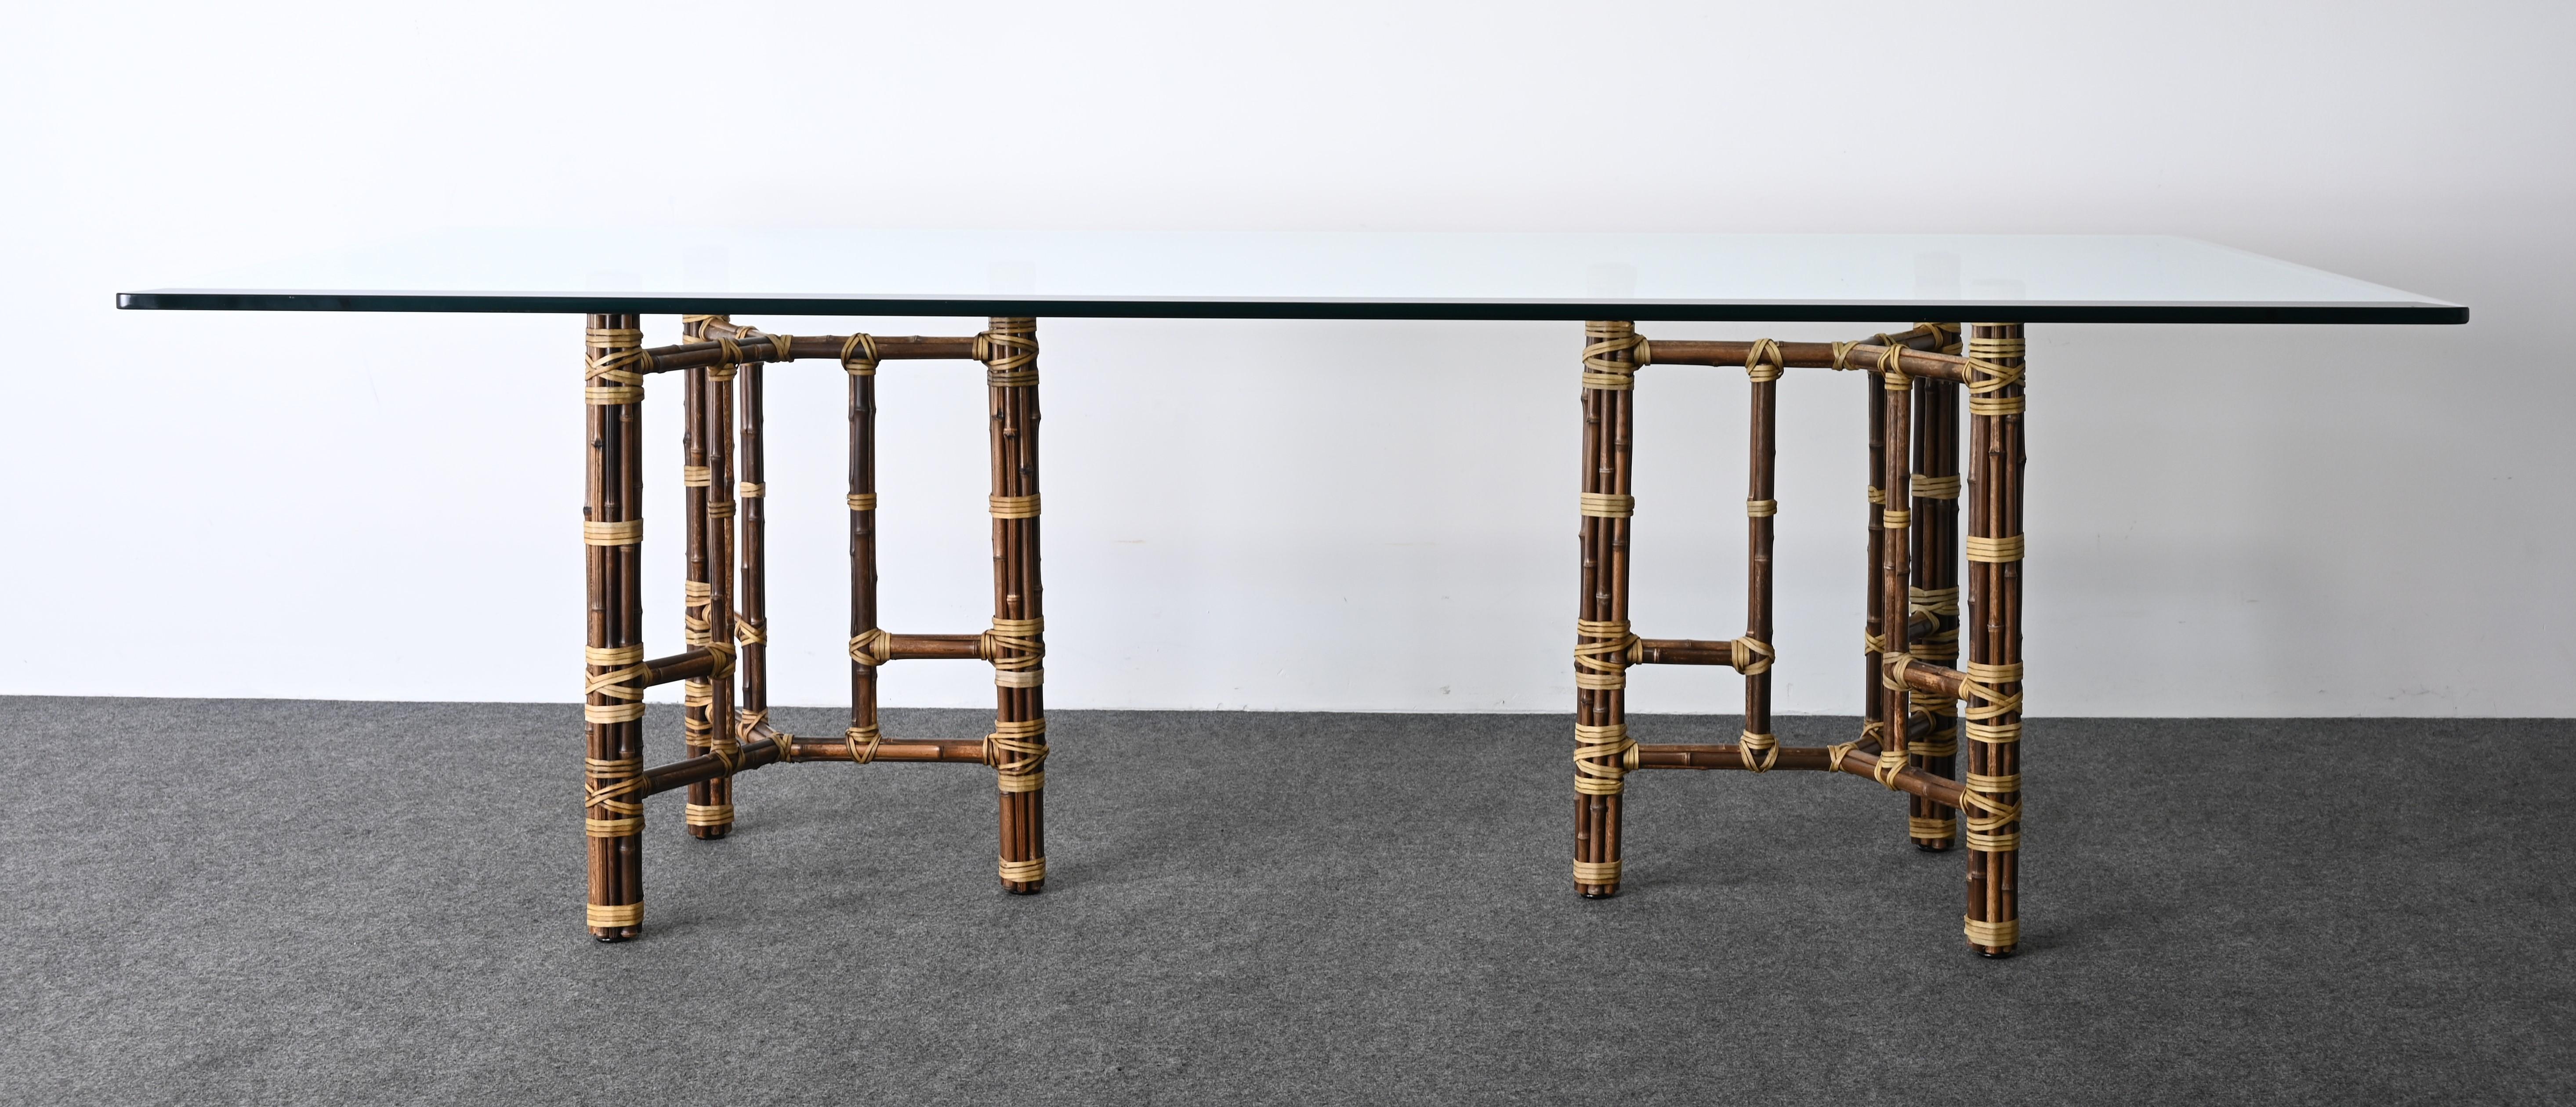 An Organic Modern Rattan dining table by McGuire, 1980s. This simple line classic table would work in any interior. In the aesthetic style of Bunny Williams, Alexa Hampton, and others, as seen in 